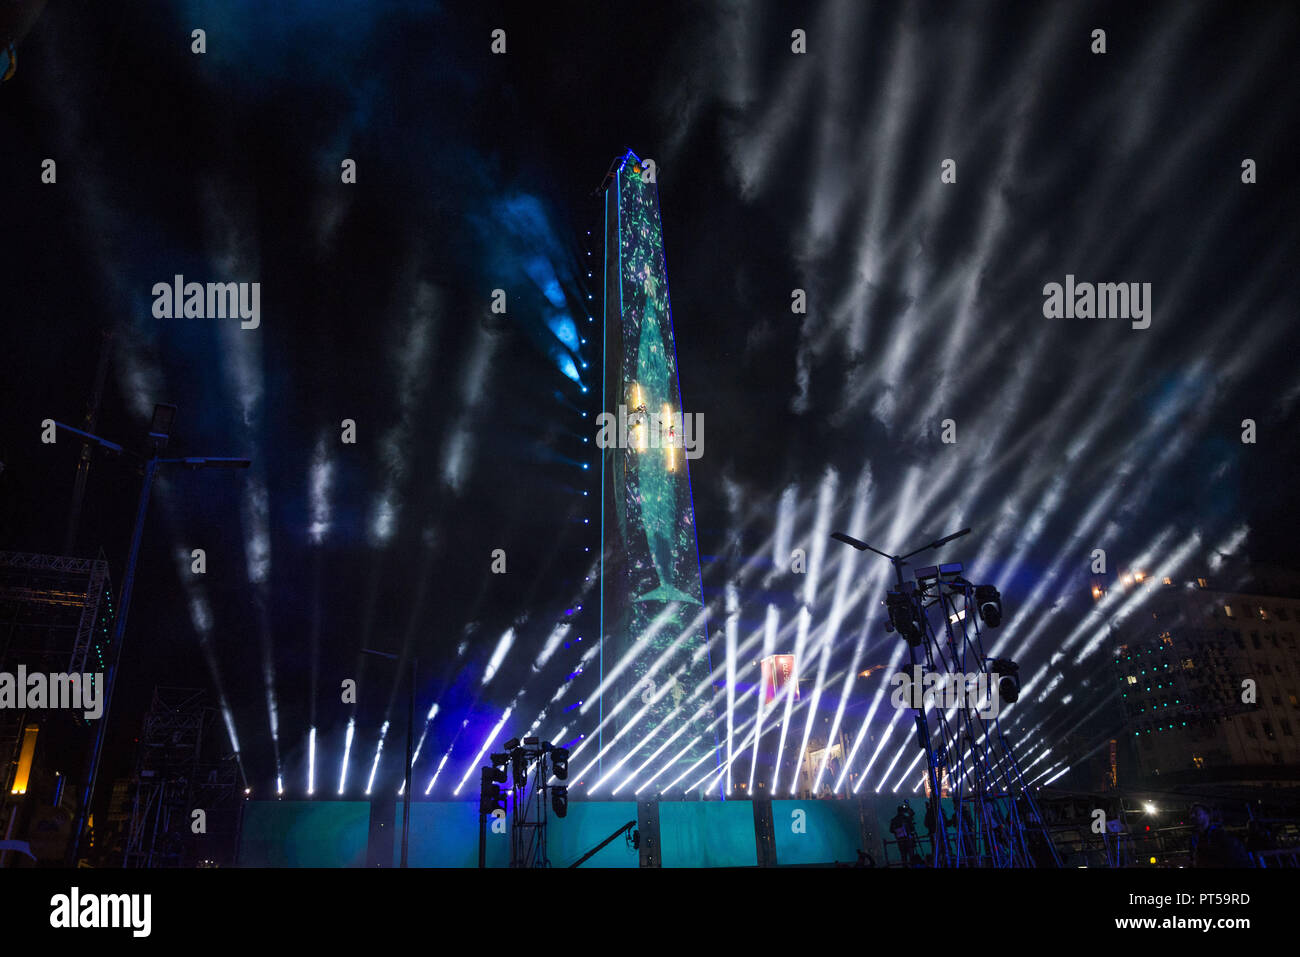 City Of Buenos Aires, City of Buenos Aires, Argentina. 6th Oct, 2018. SPORTS. 2018, October 6.- City of Buenos Aires, Argentina.- The Opening Ceremony of the Youth Olympic Games Buenos Aires 2018 is held at the Obelisk in City of Buenos Aires, Argentina, on October 6, 2018. The artistic group Fuerza Bruta is in charge of the show. Credit: Julieta Ferrario/ZUMA Wire/Alamy Live News Stock Photo